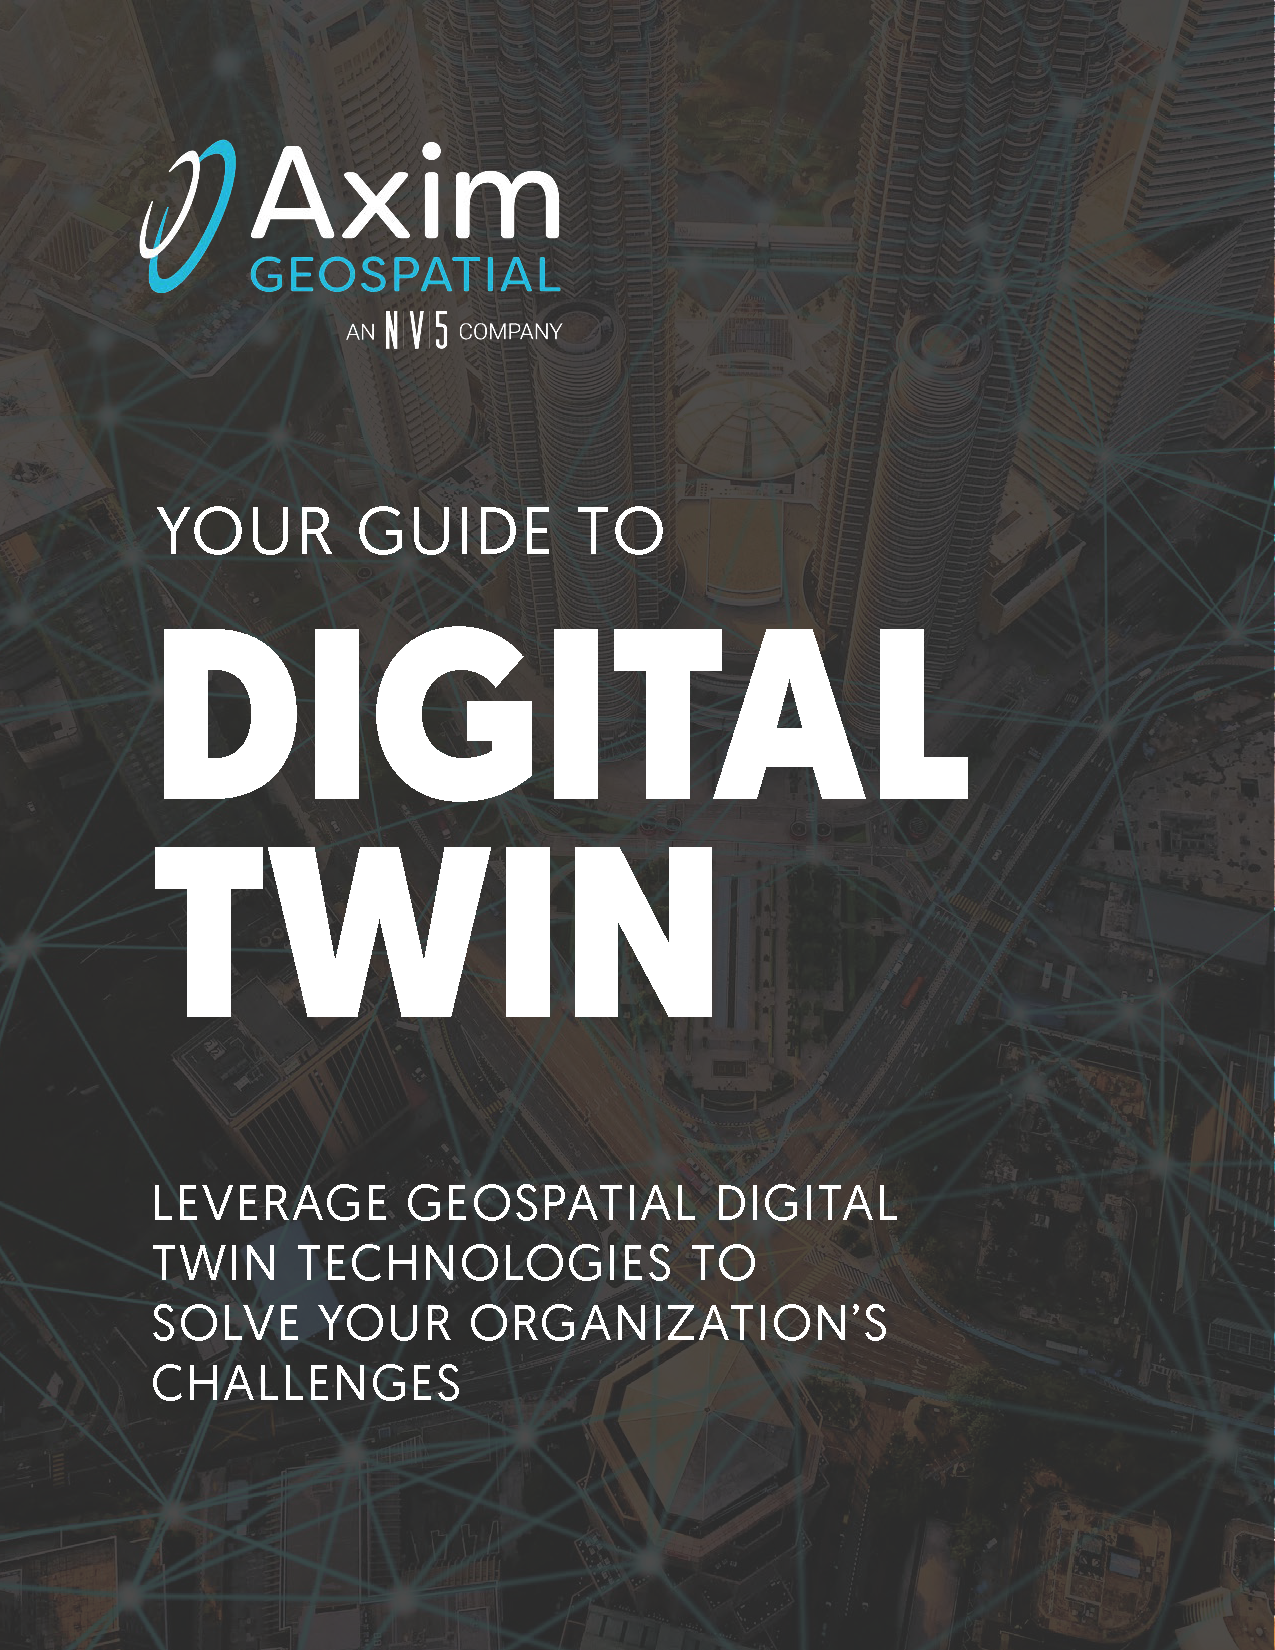 Thumbnail_Your Guide to Geospatial Digital Twins Ebook - Axim Geospatial (002)